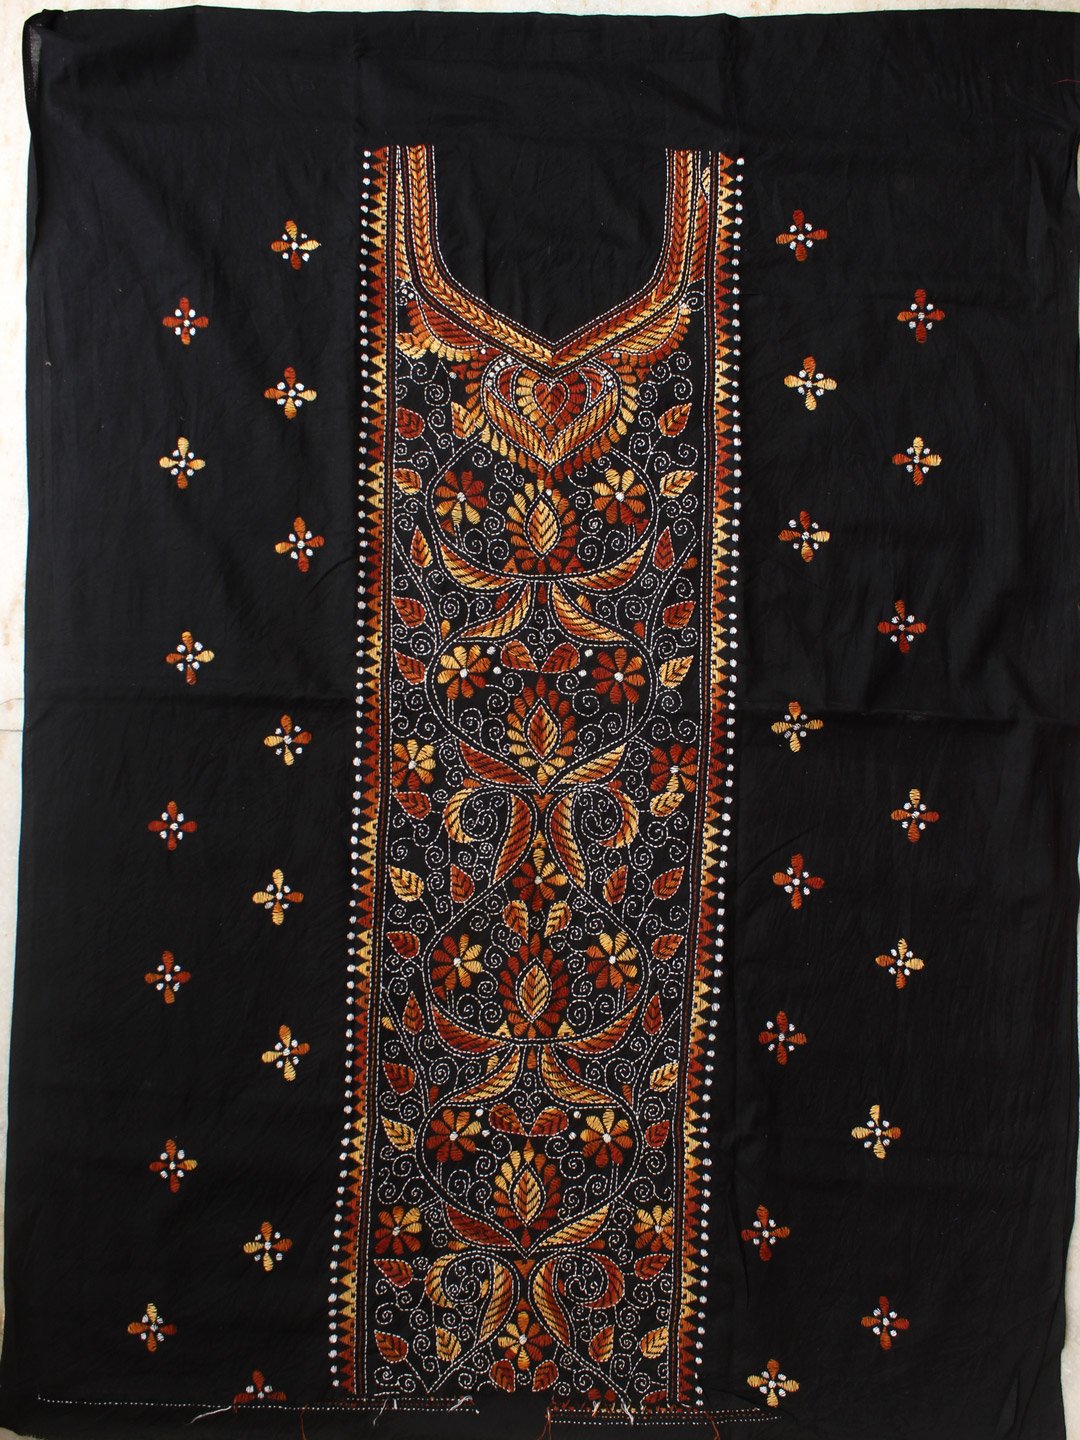 Brown Kantha Embroidered, Black Cotton Fabric – Shilphaat.com